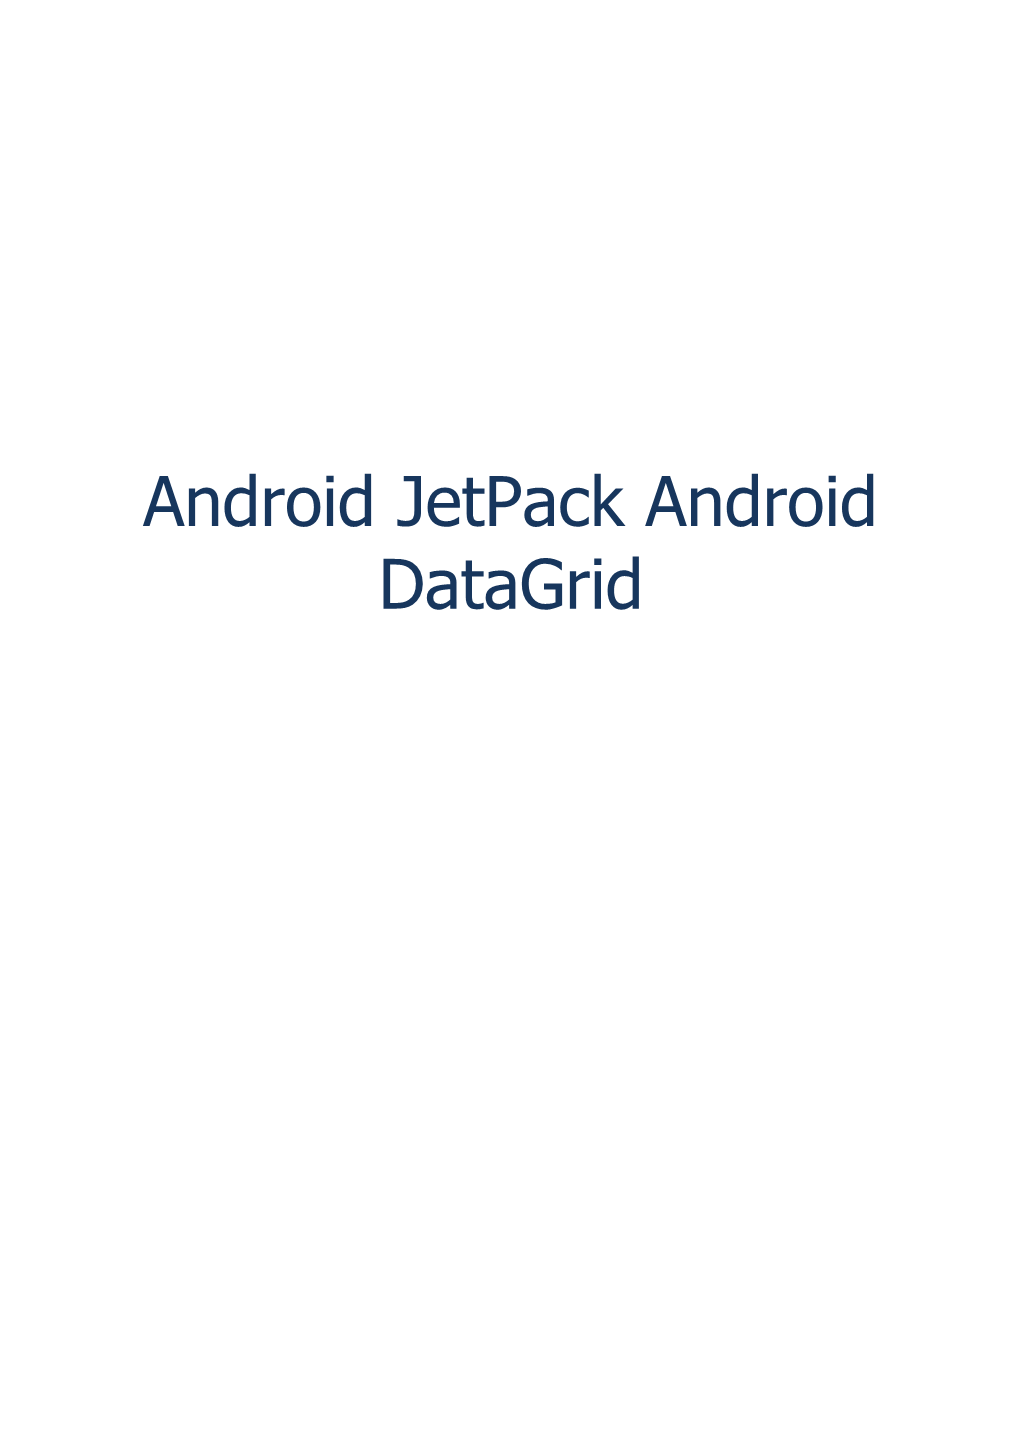 Android Jetpack Android Datagrid